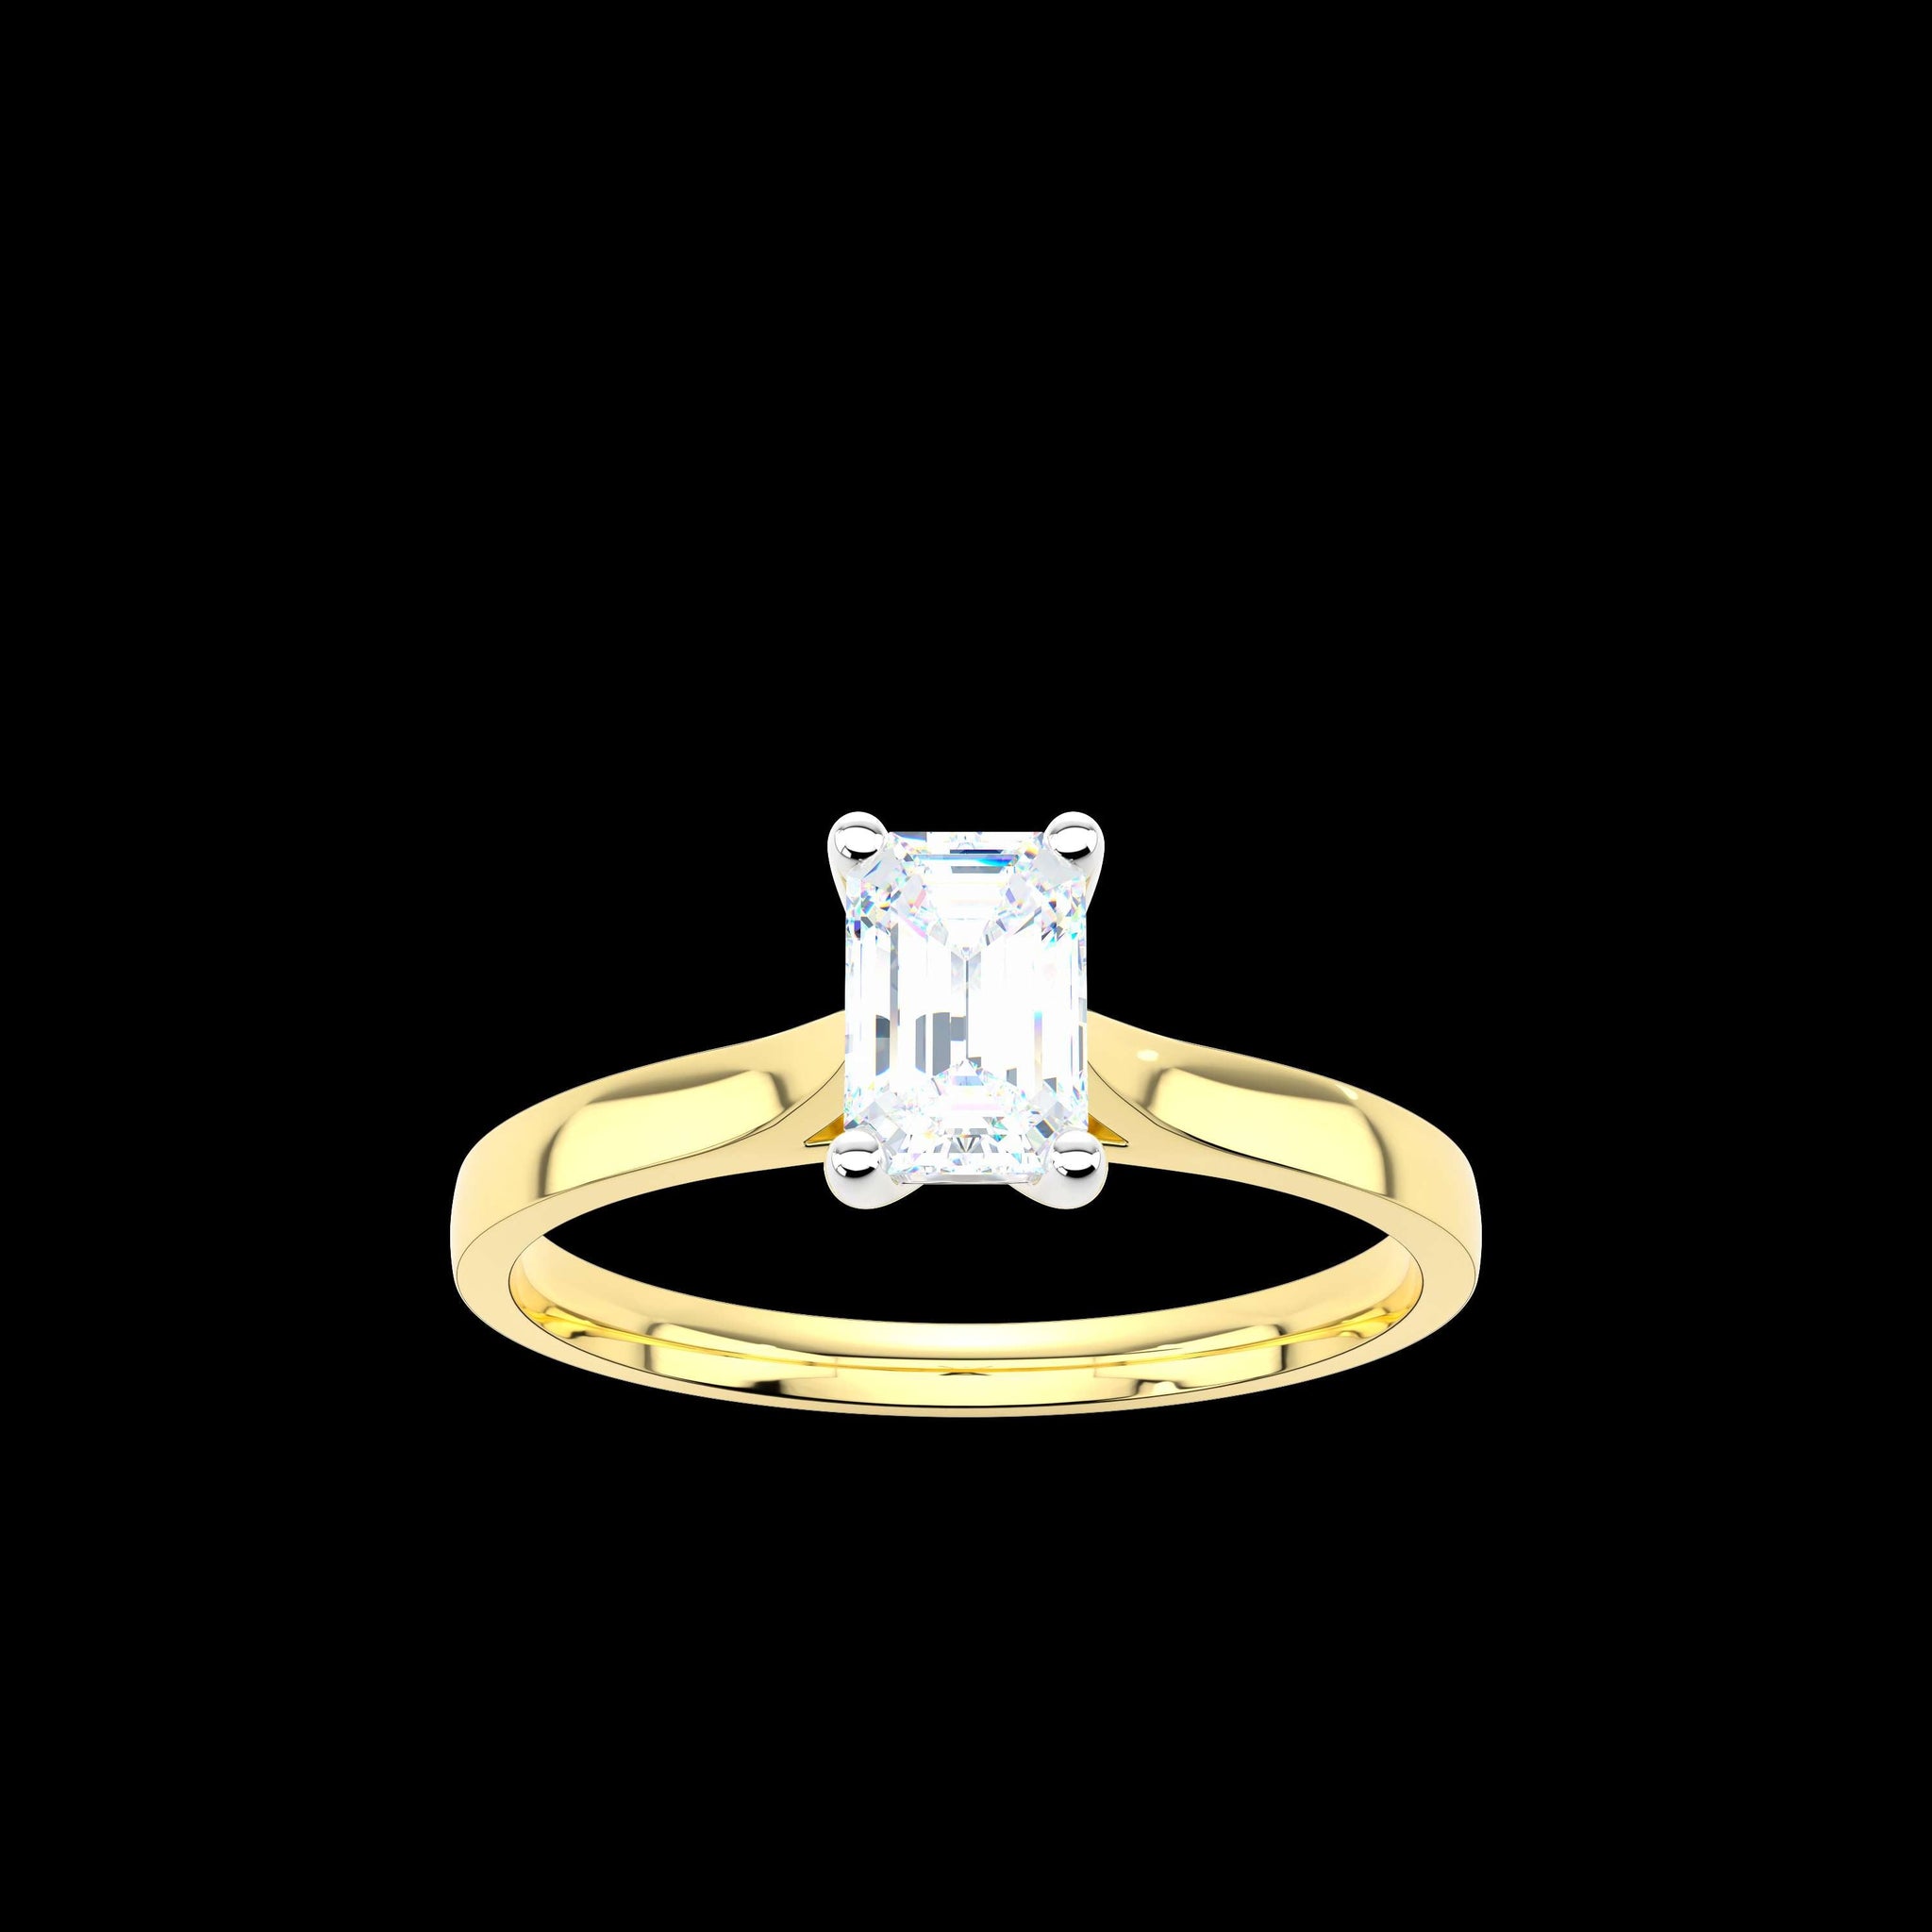 Ophelia *Select an Emerald Cut Diamond 0.40ct or above